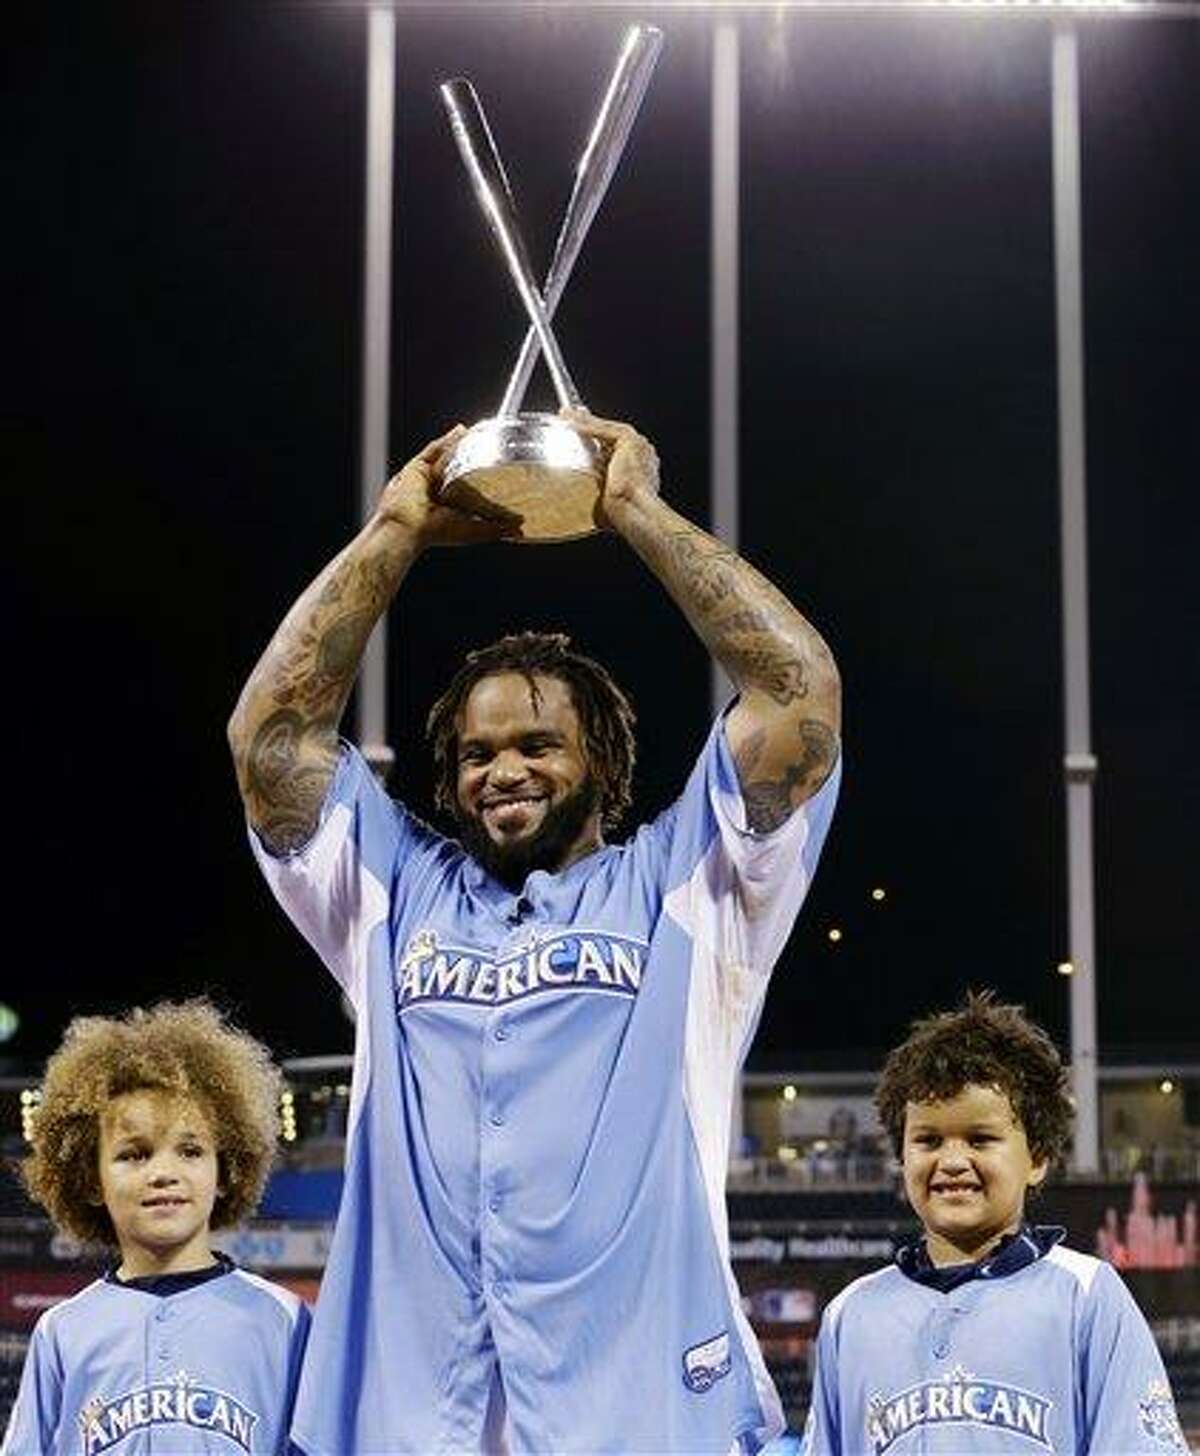 Prince Fielder wins Home Run Derby for second time